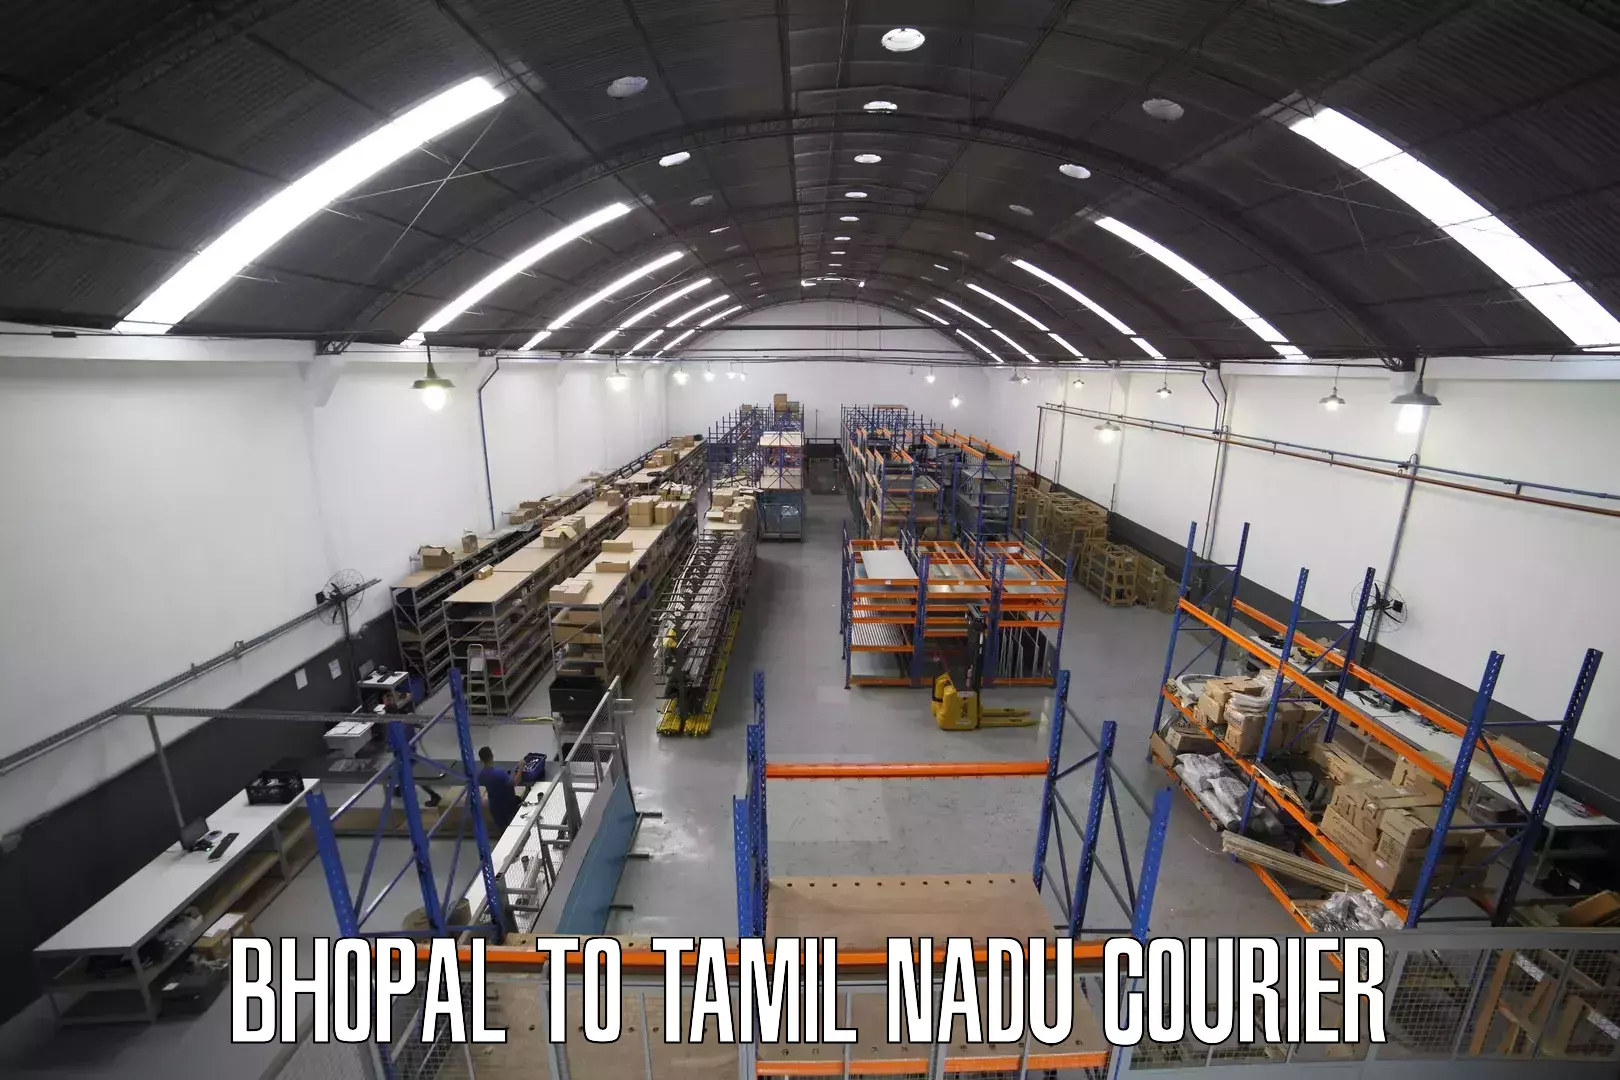 Delivery service partnership Bhopal to Tamil Nadu